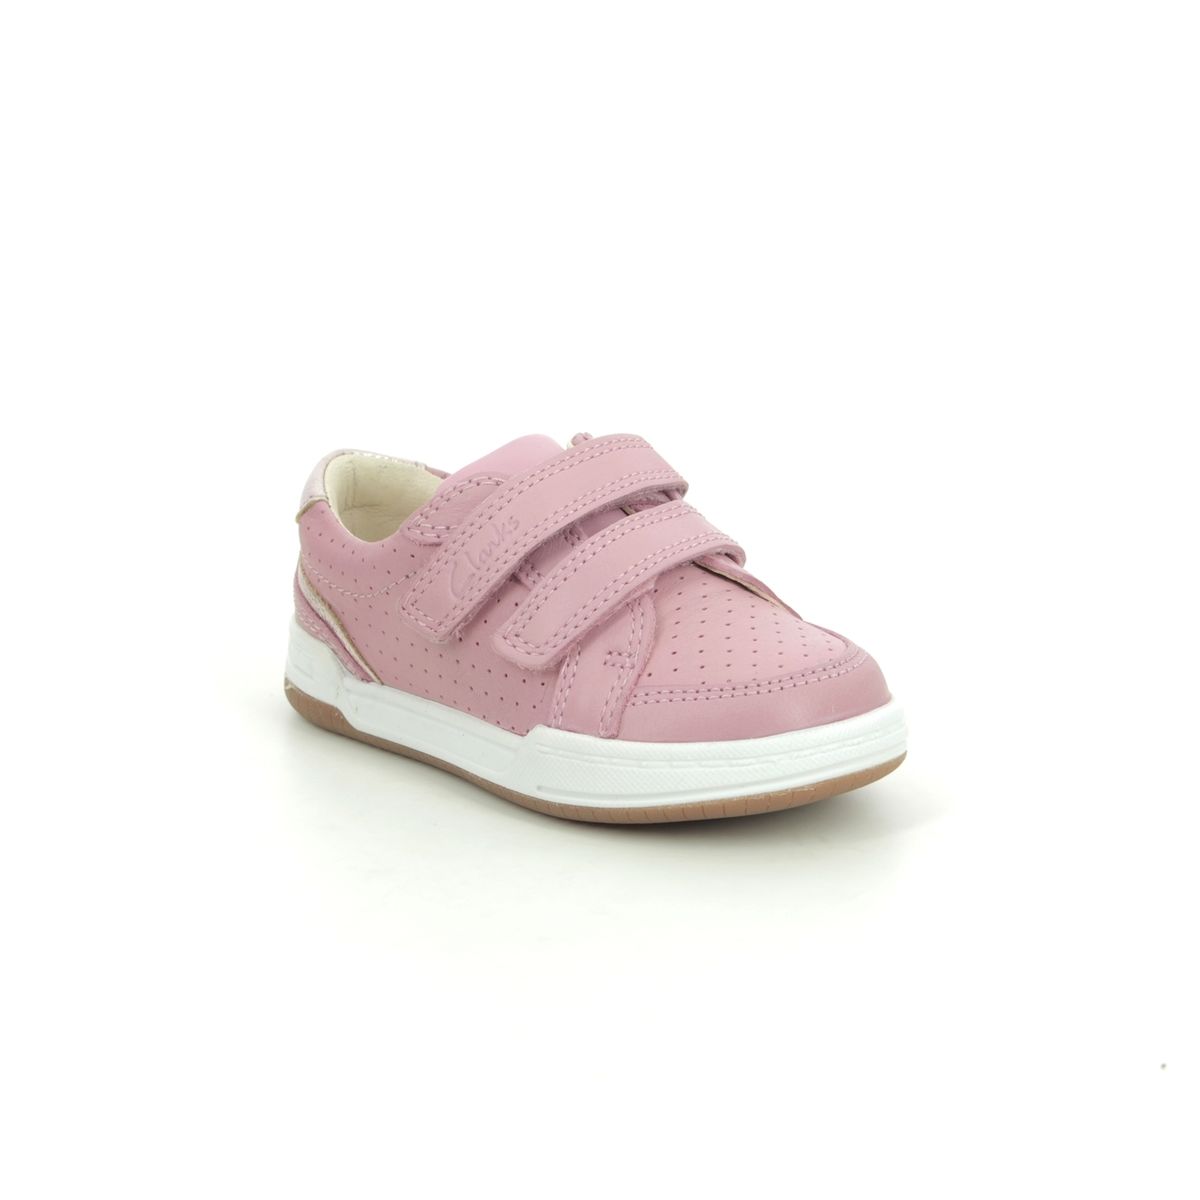 Clarks Fawn Solo T Pink Leather Kids First And Toddler 589895E In Size 8.5 In Plain Pink Leather E Width Fitting Narrow Fit For kids